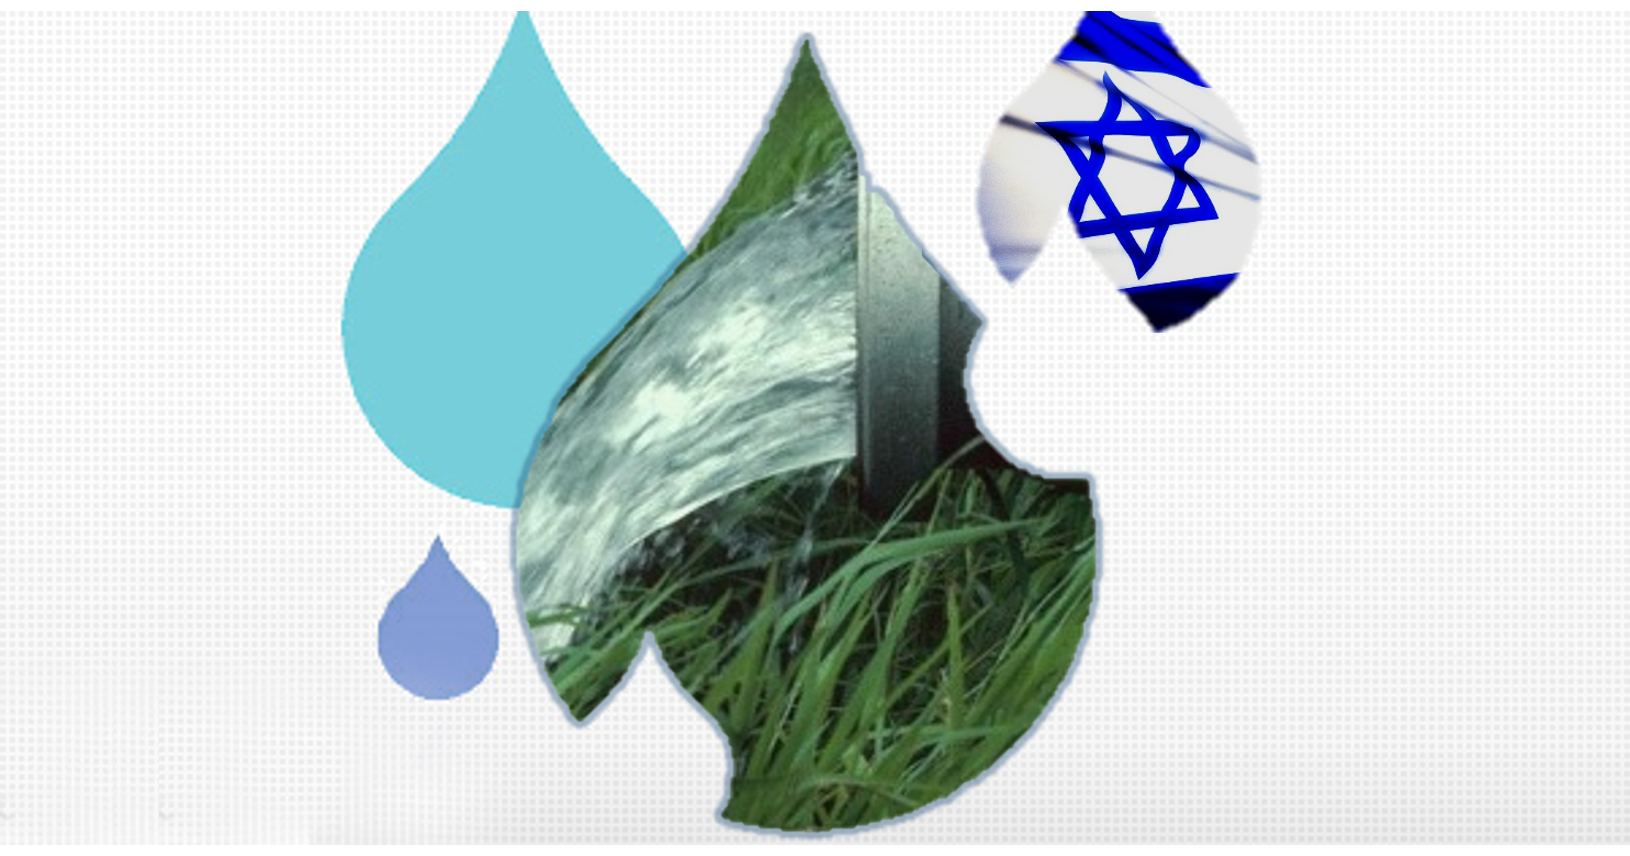 Dripping with innovation: 5 Israeli water tech companies changing the world